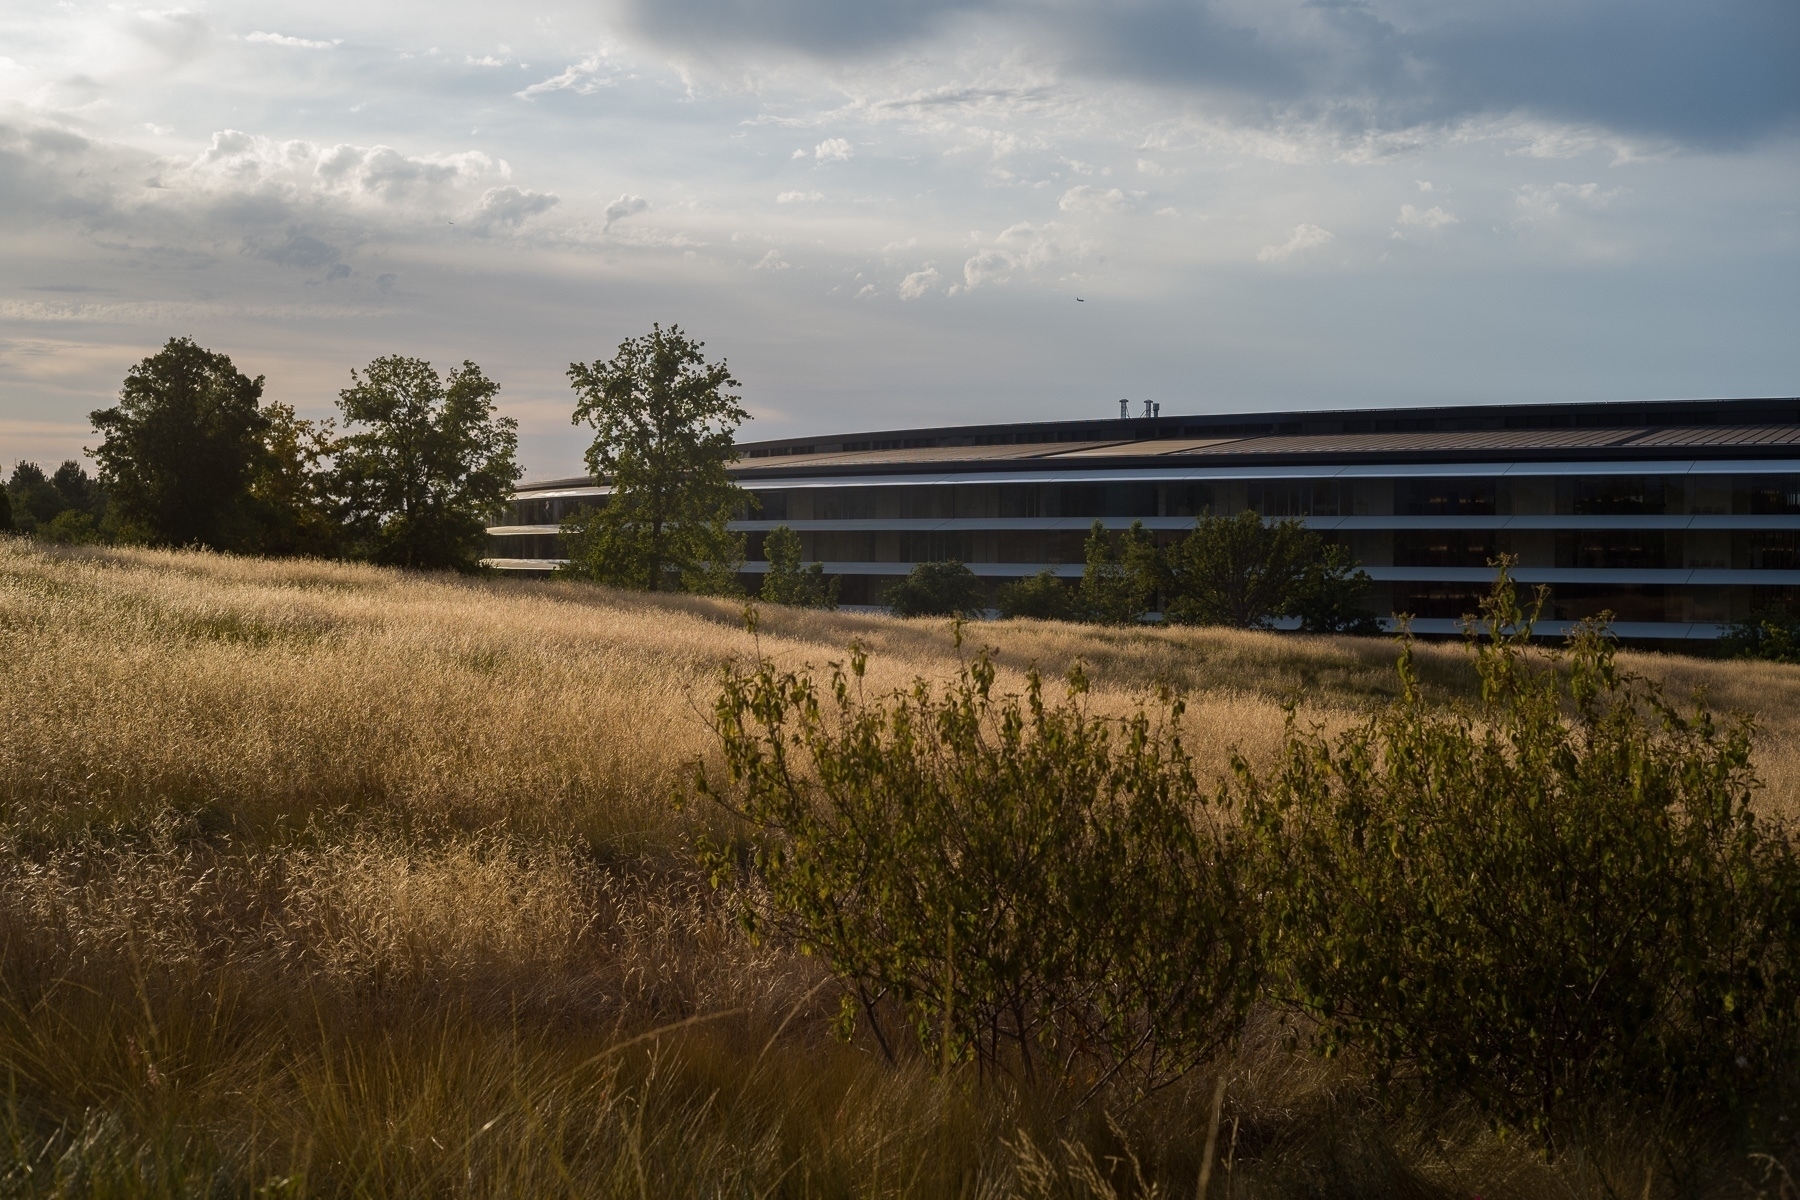 Golden grass in the foreground and Apple Park building in the distance, with a dramatic cloudy sky above. Everything is lit by the late evening sunlight.